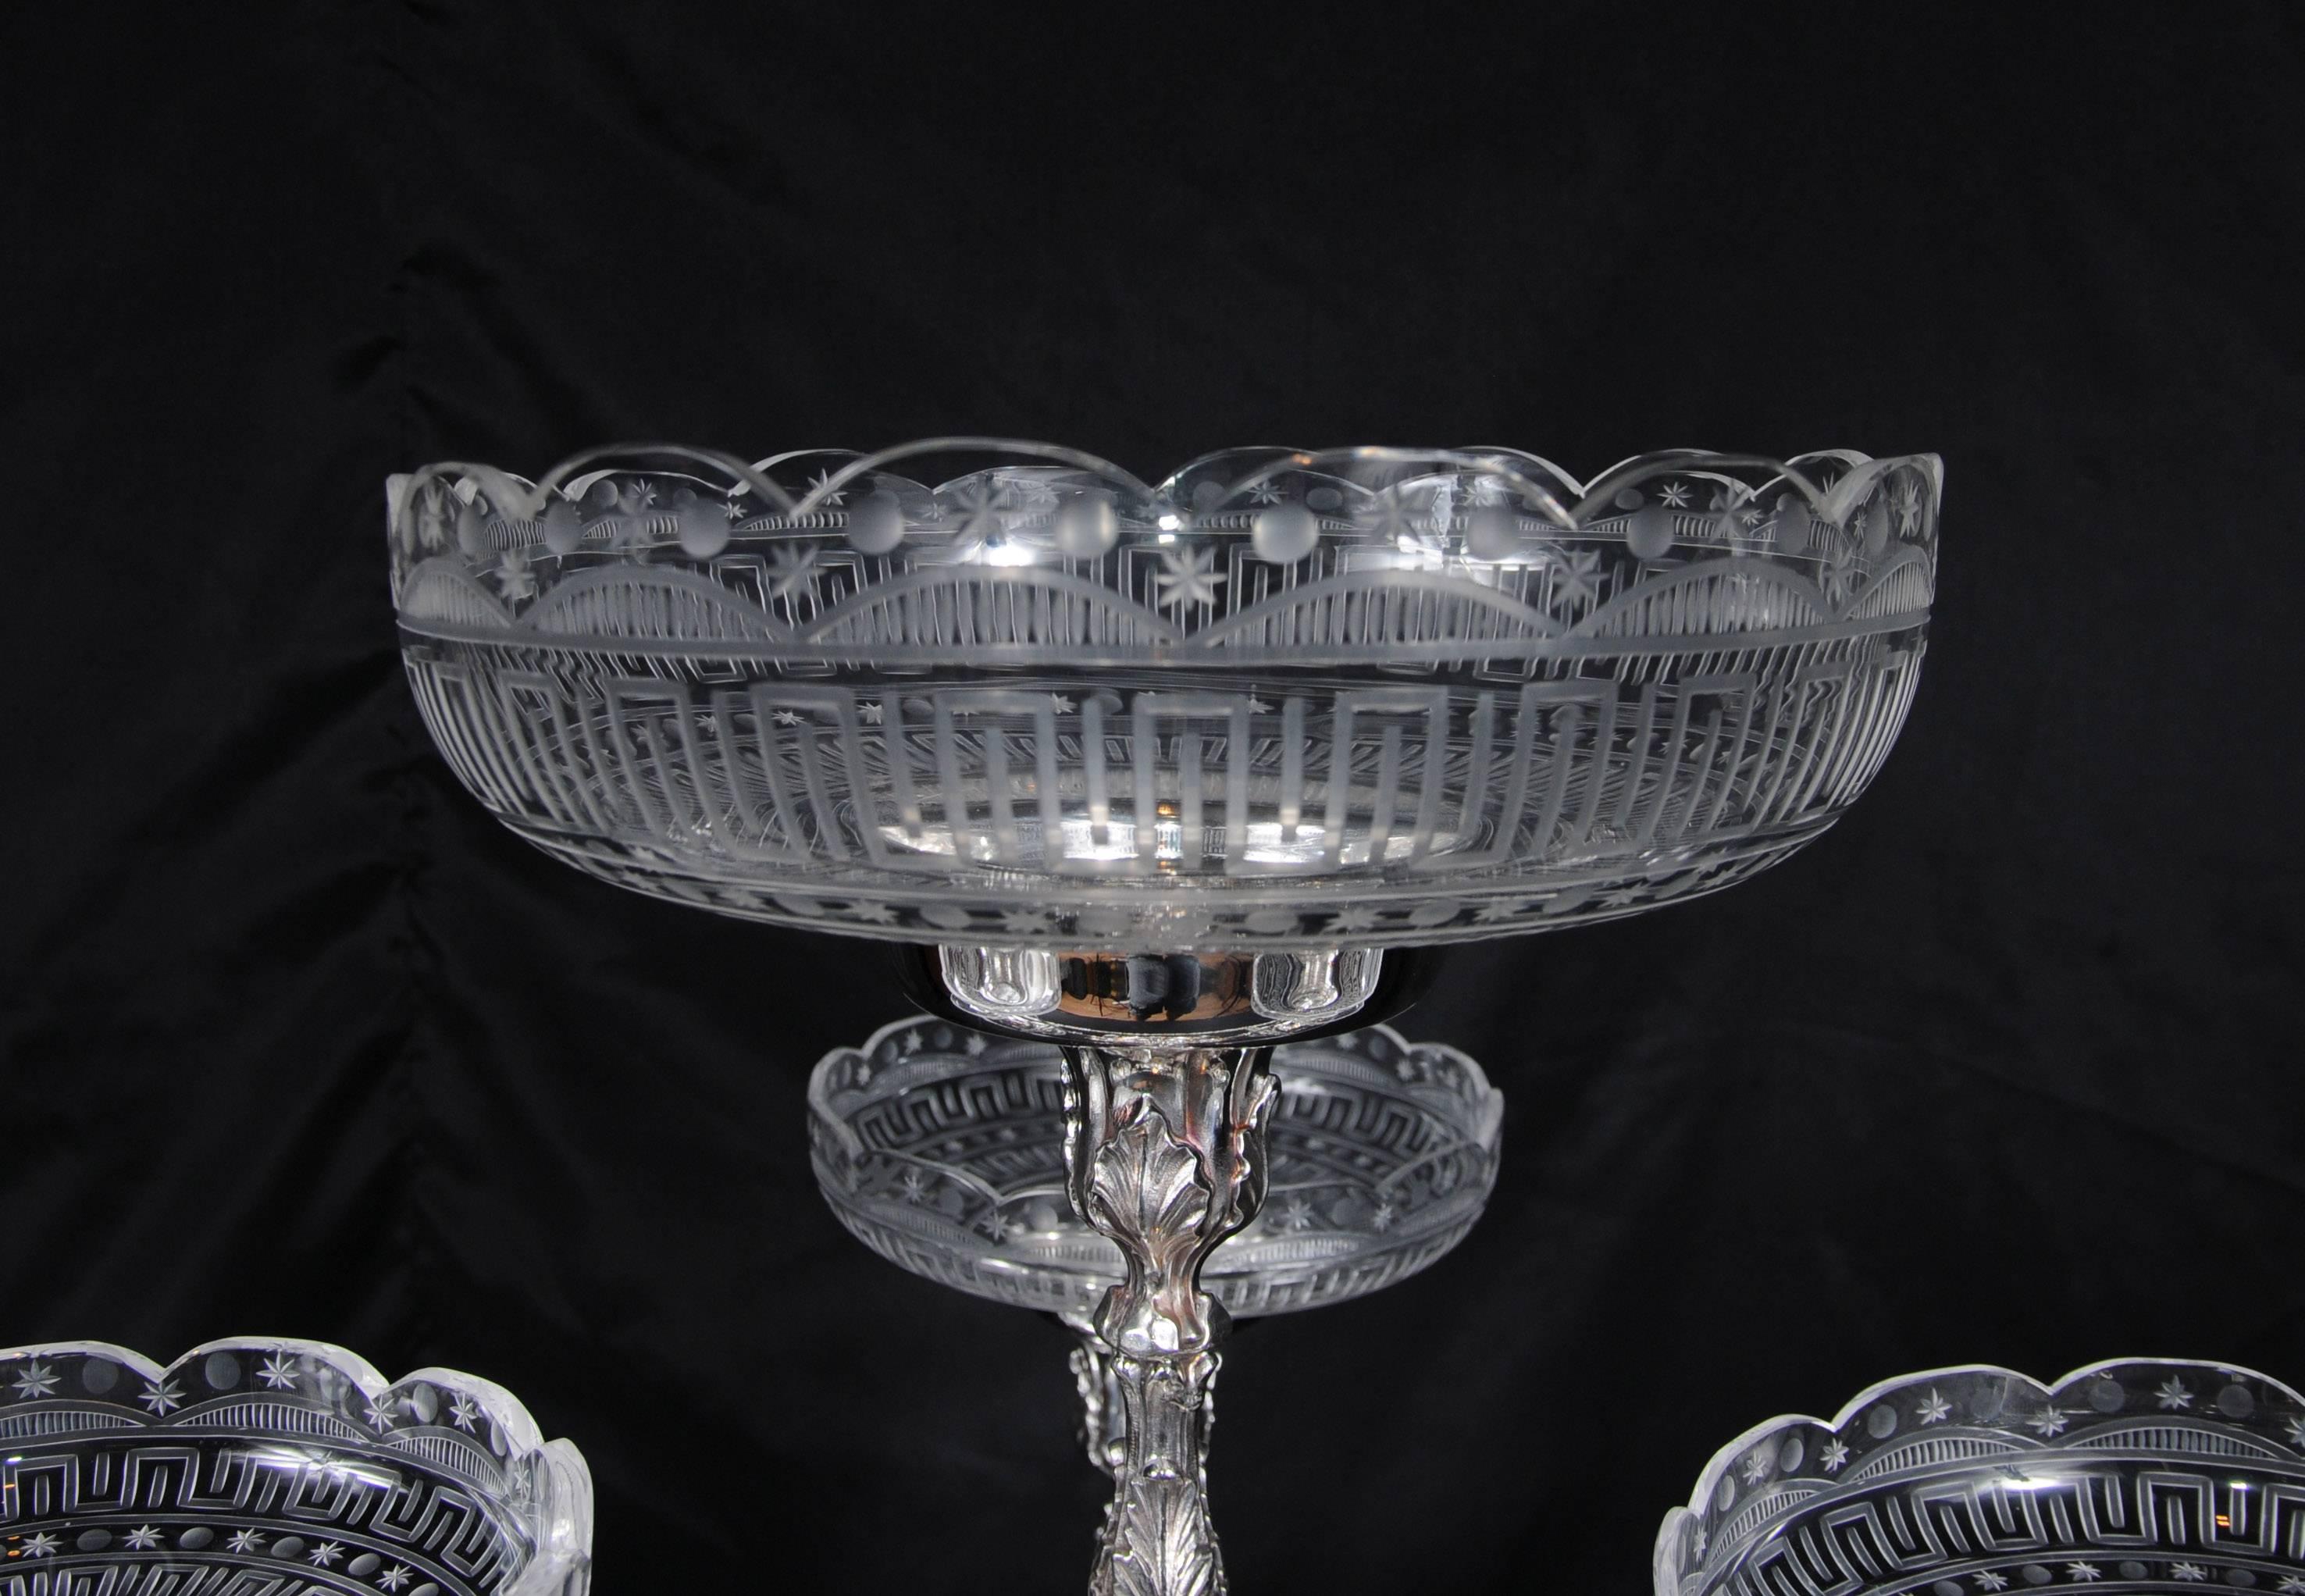 You are viewing a gorgeous English Sheffield silver plate centrepiece.
Hard to describe this stunning work of art and craftsmanship, hope the photos do it some justice!
The amazing thing about this piece is that the central piece can either be